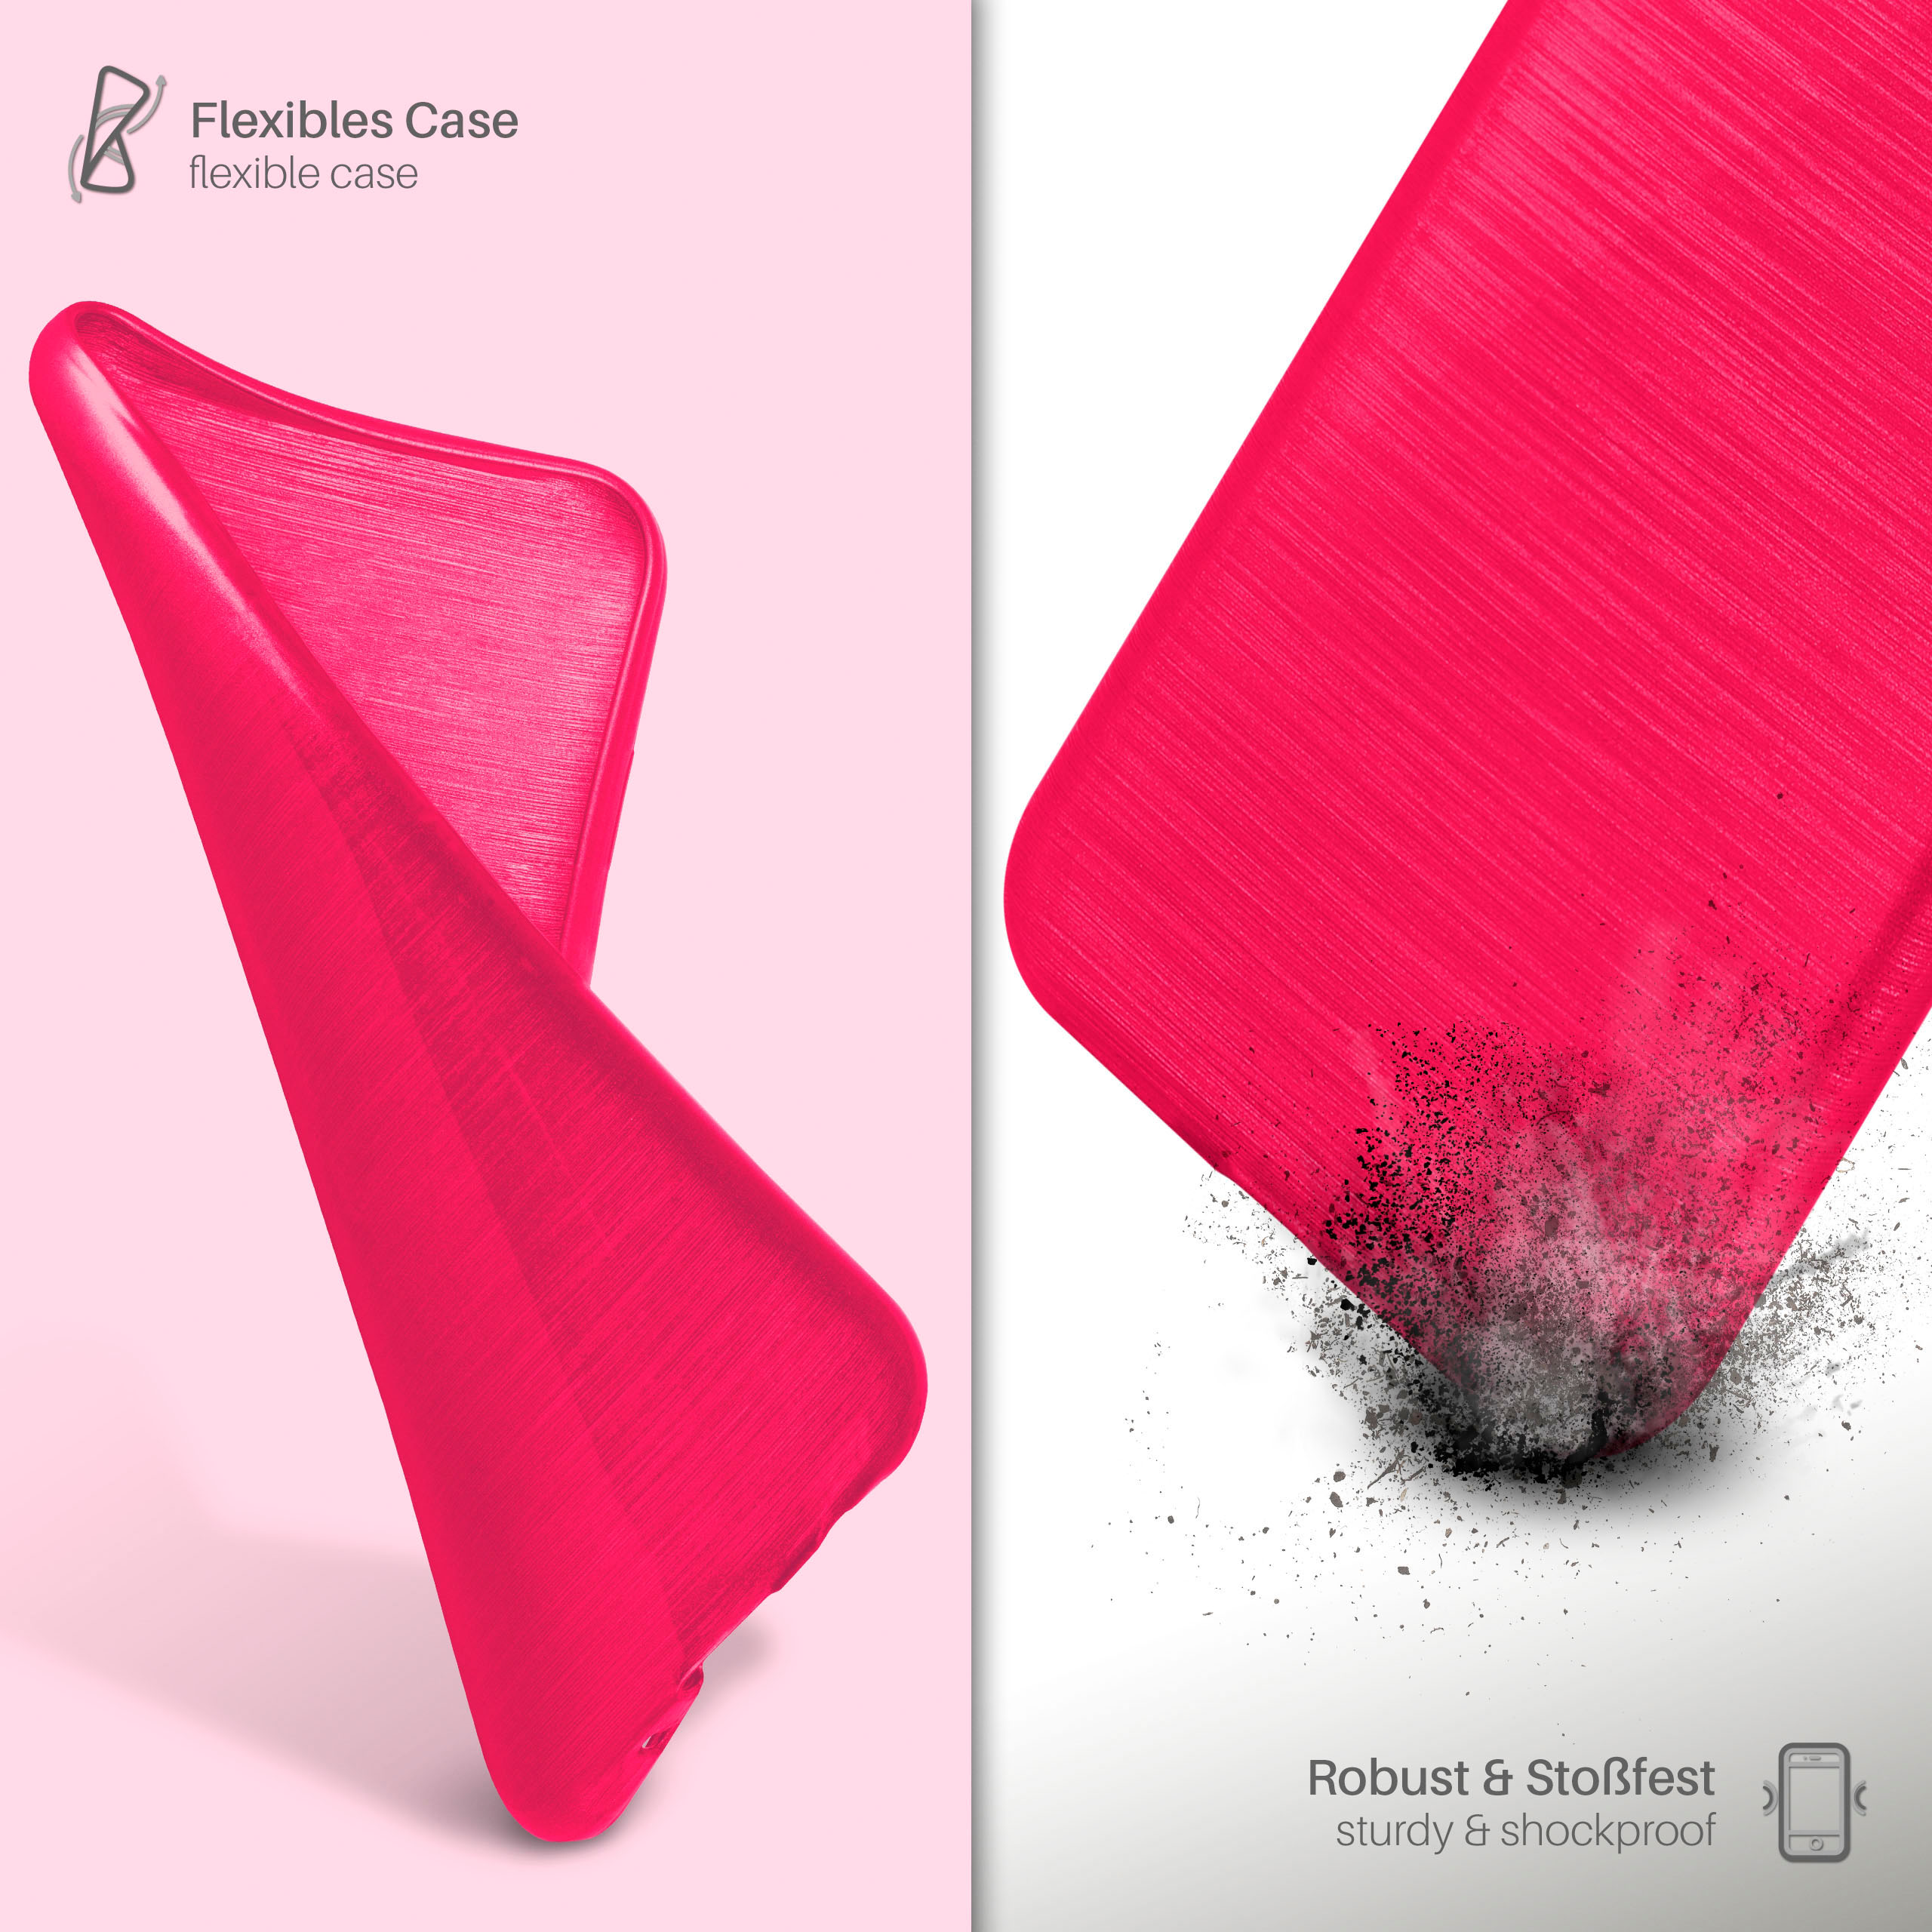 MOEX Brushed Case, Backcover, Samsung, Neo, Galaxy S3 Magenta-Pink S3 